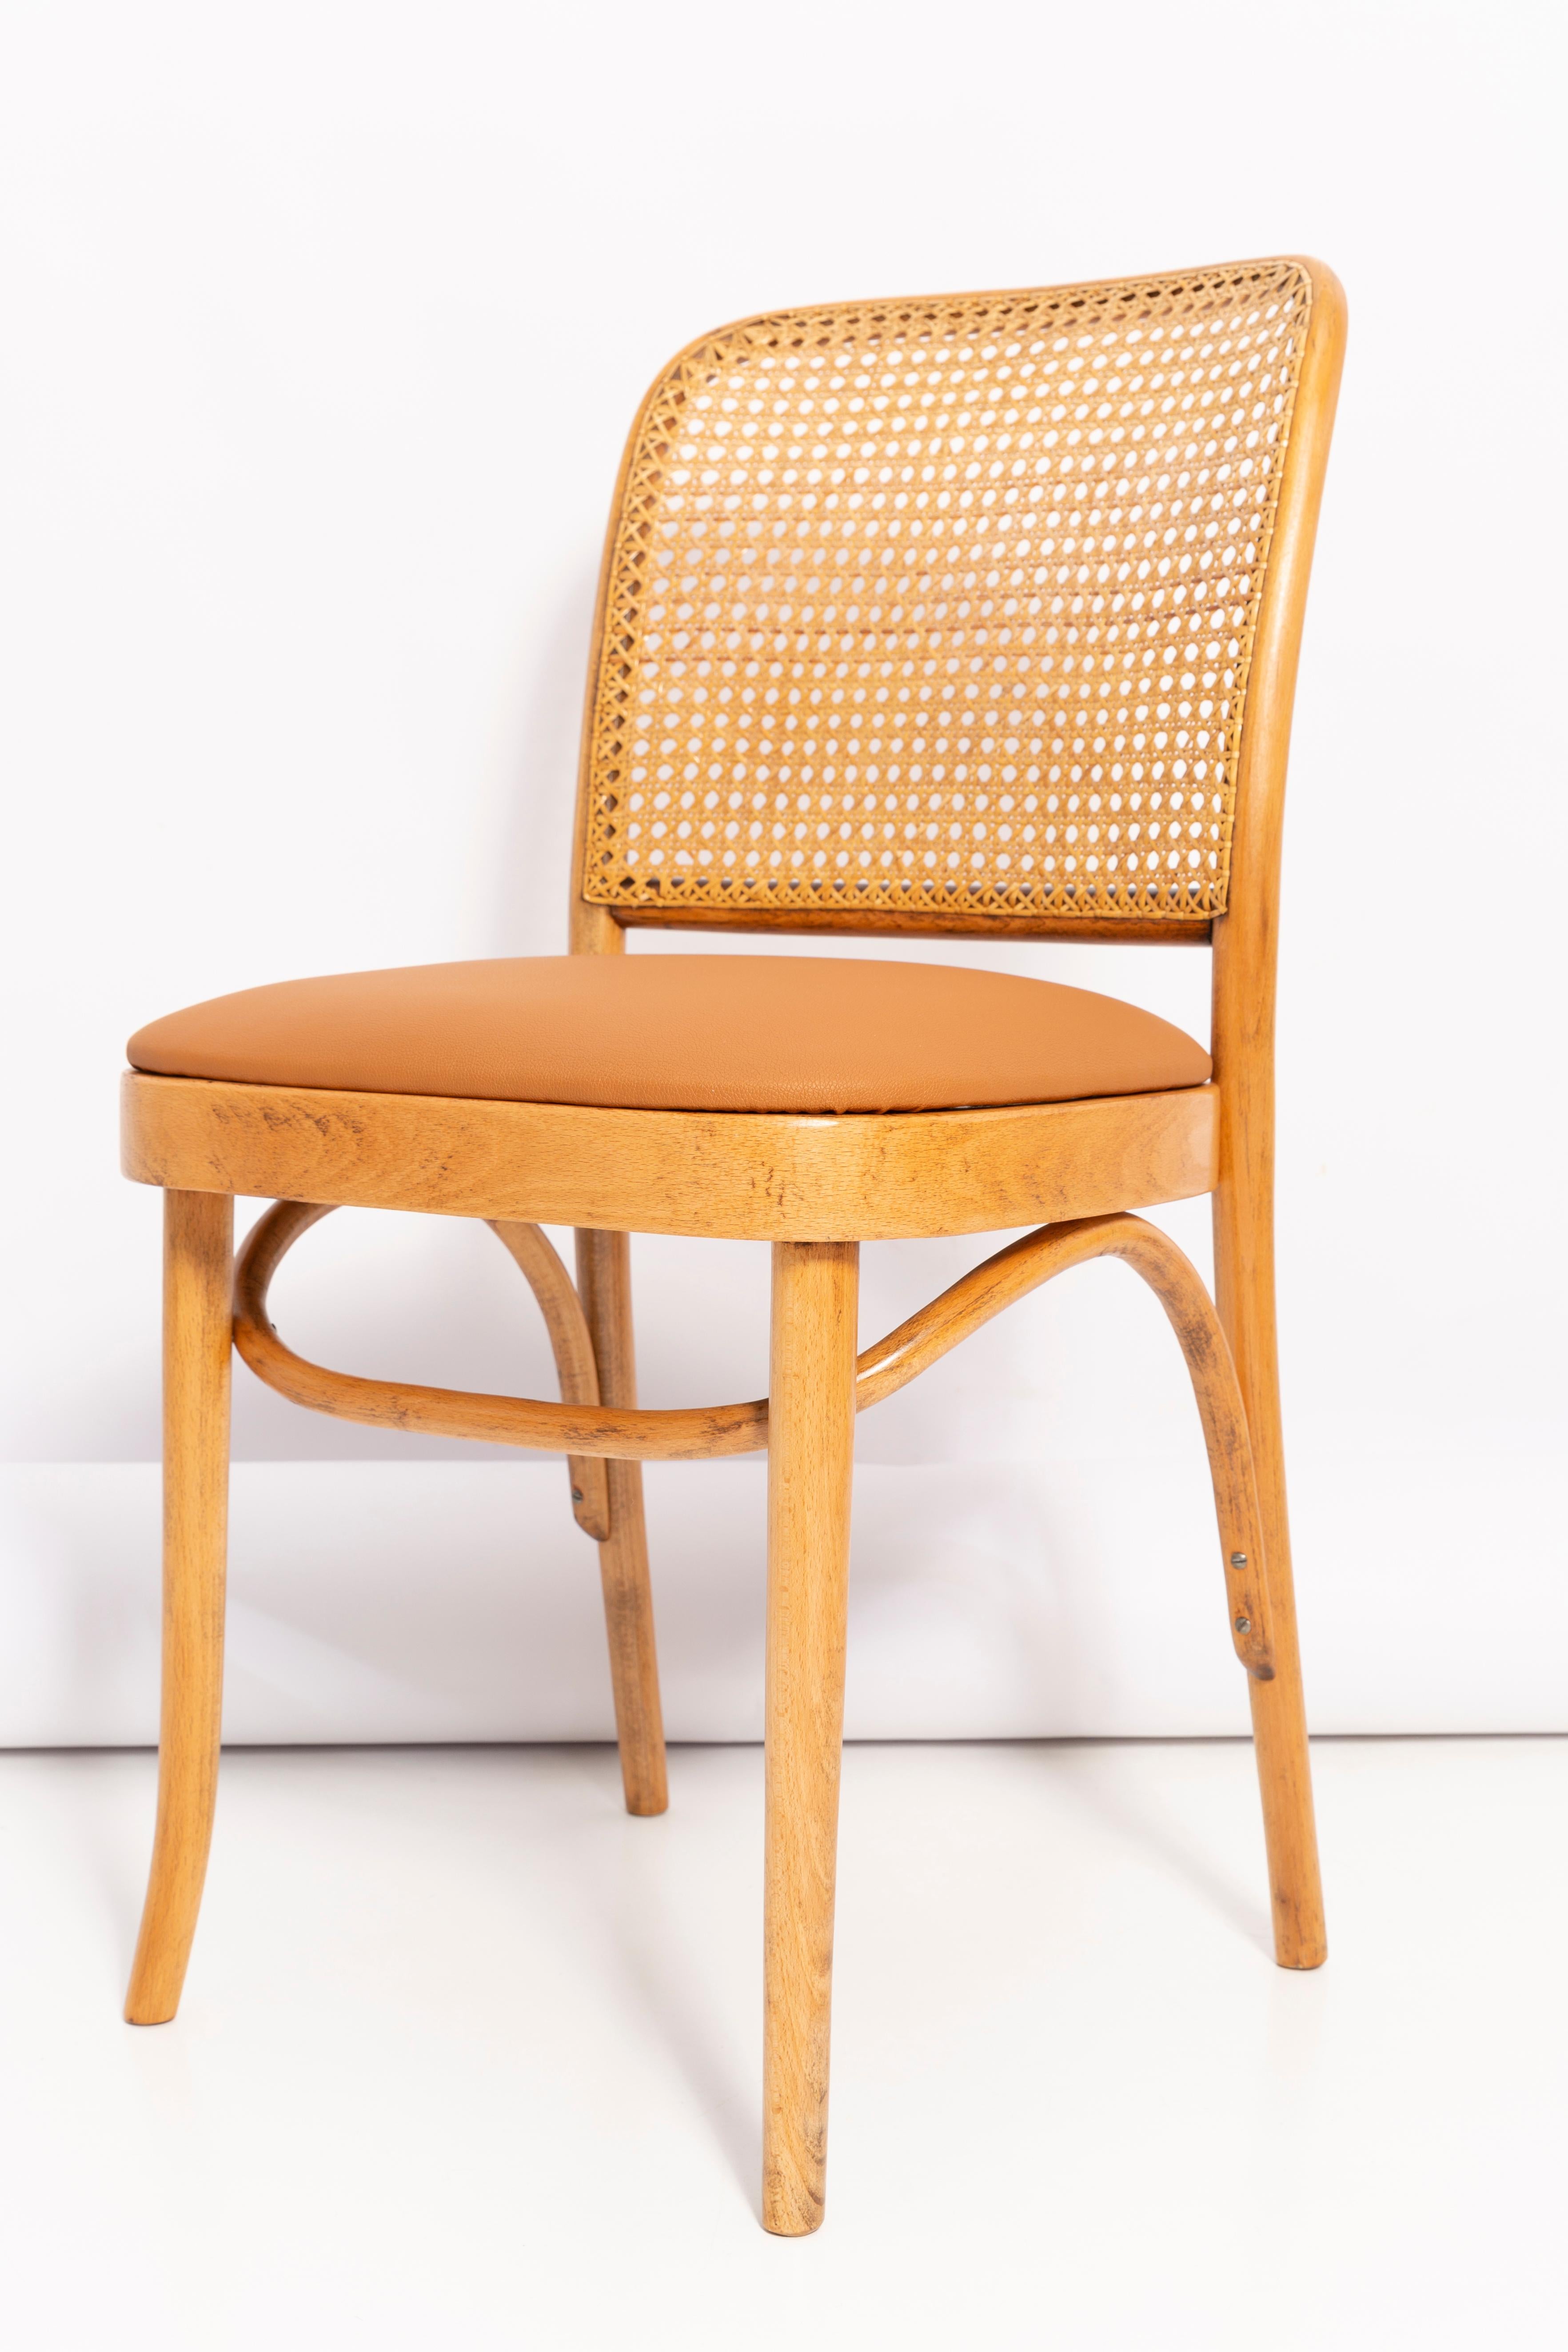 Camel Faux Leather Thonet Wood Rattan Chair, 1960s For Sale 1